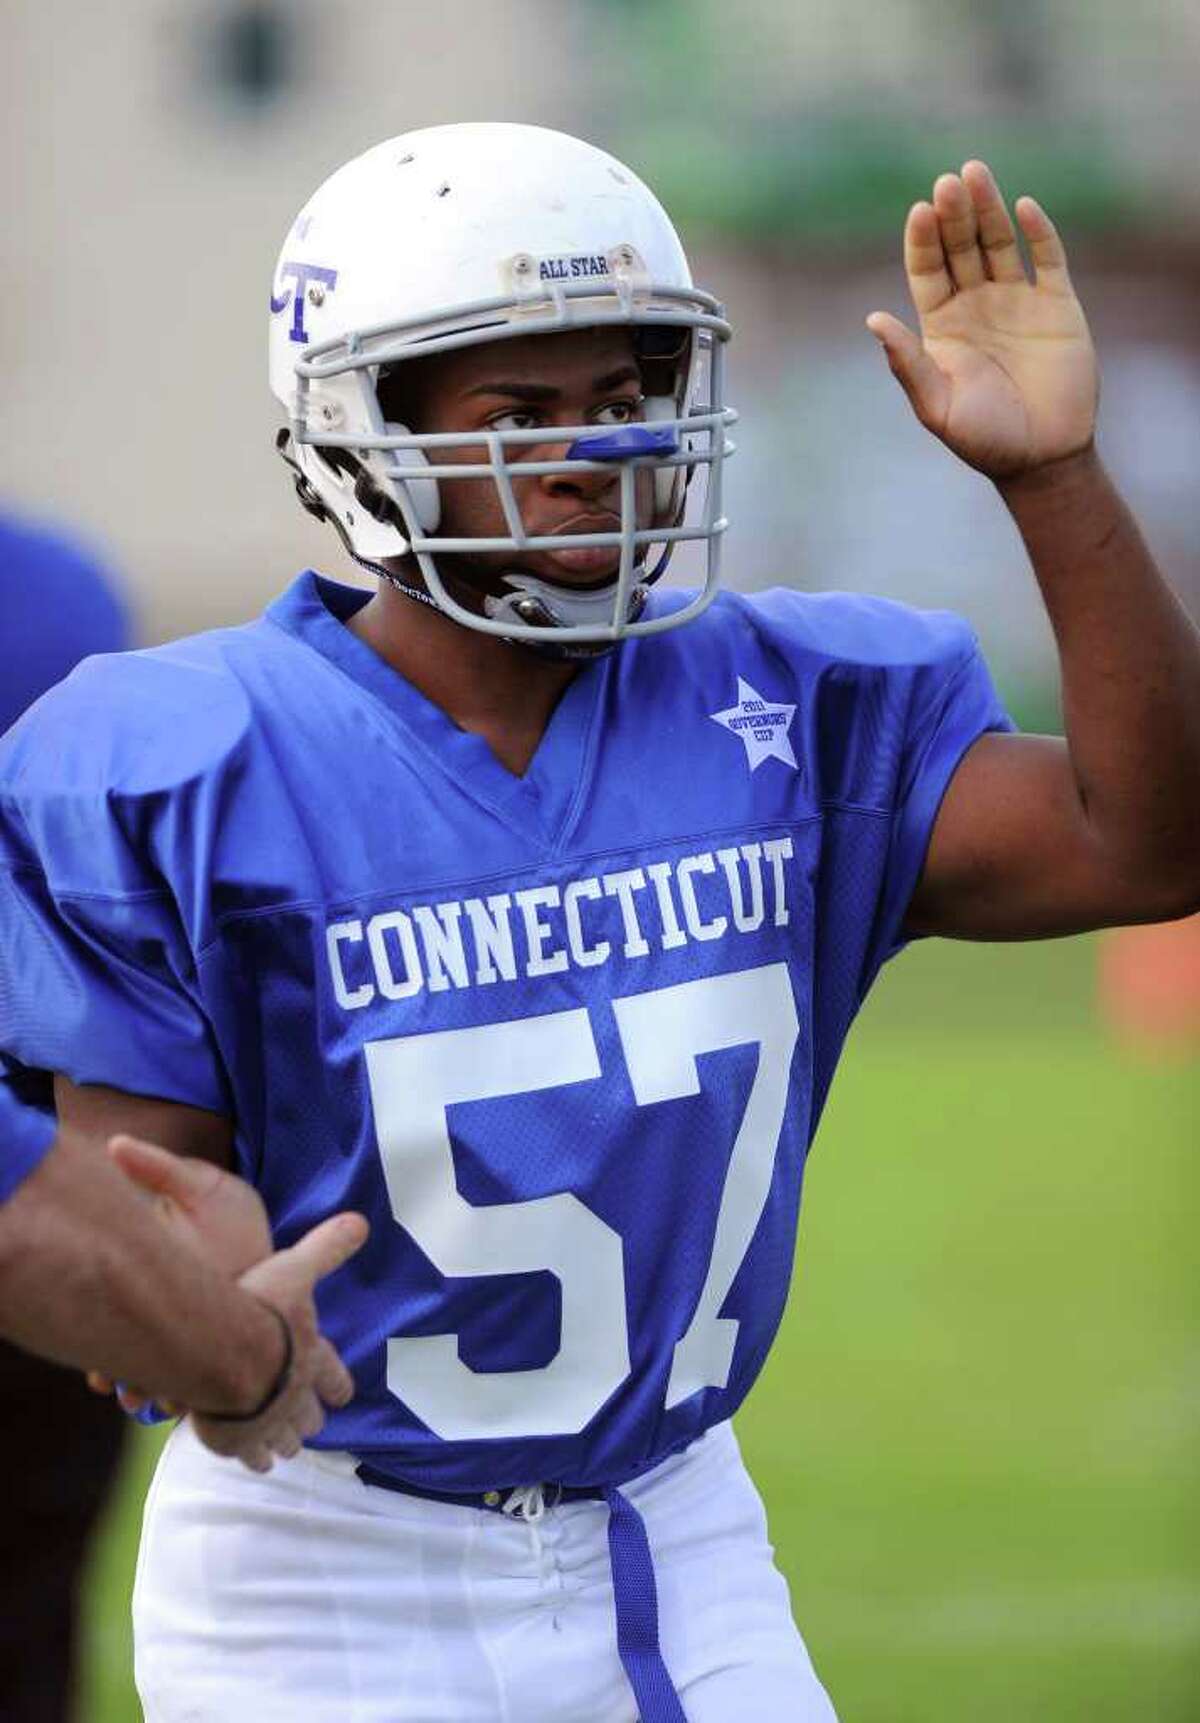 Stamford High School's Mark Robinson enters the field for the Connecticut High School football all-star game against Rhode Island on June 25, 2011, at Southington High School.